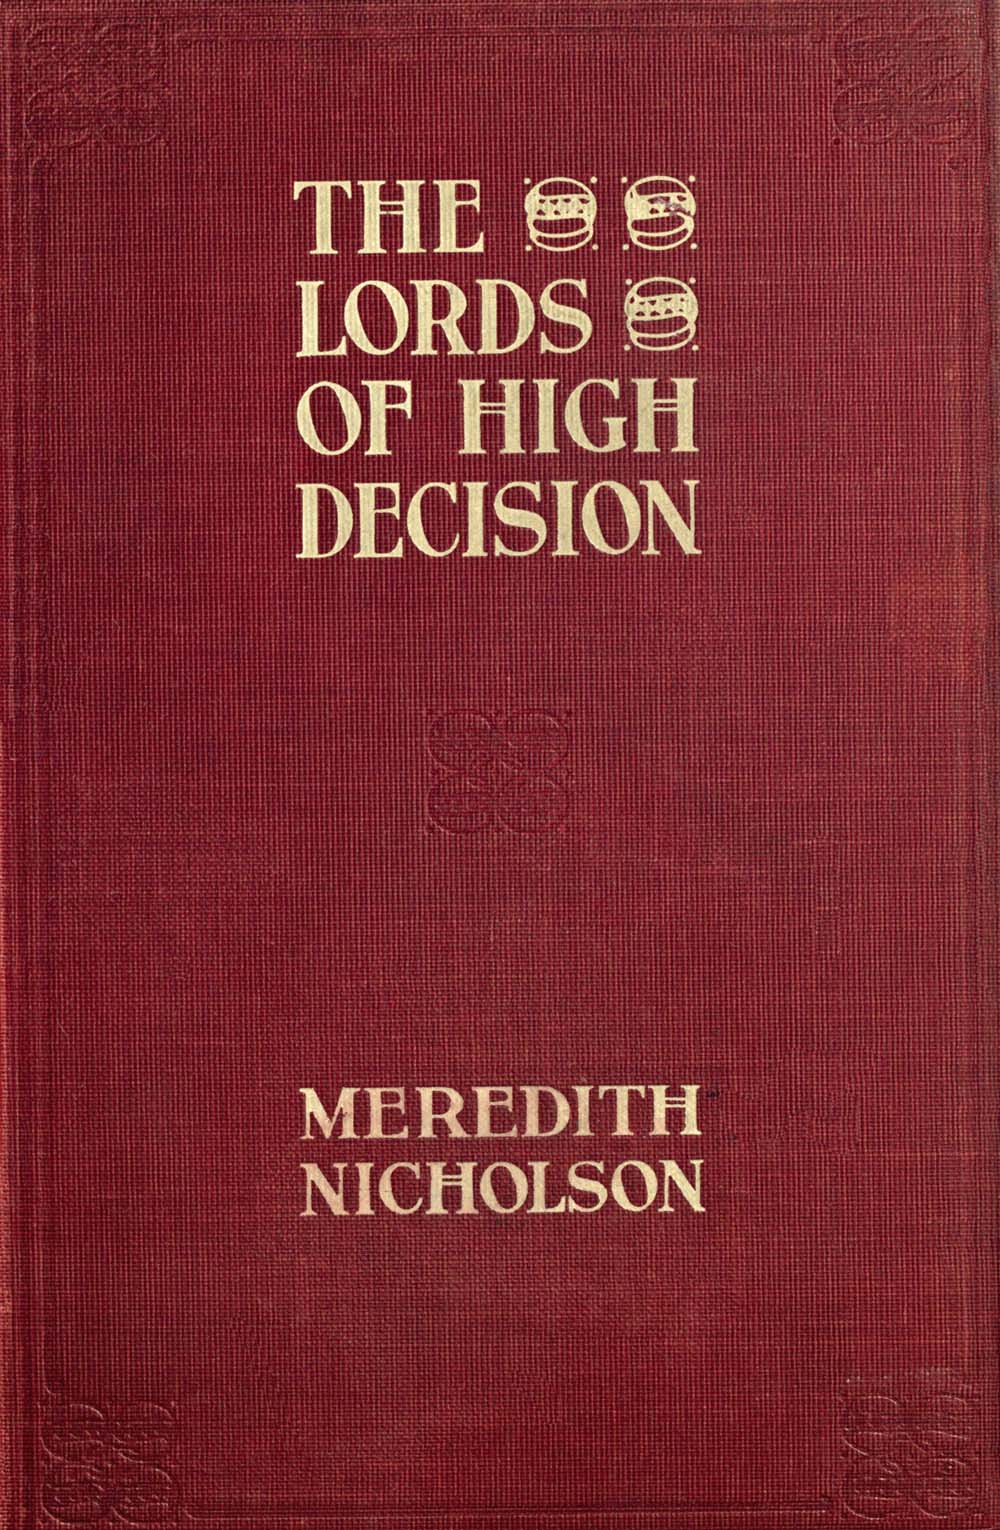 The Lords of High Decision, by Meredith Nicholson—A Project Gutenberg eBook image